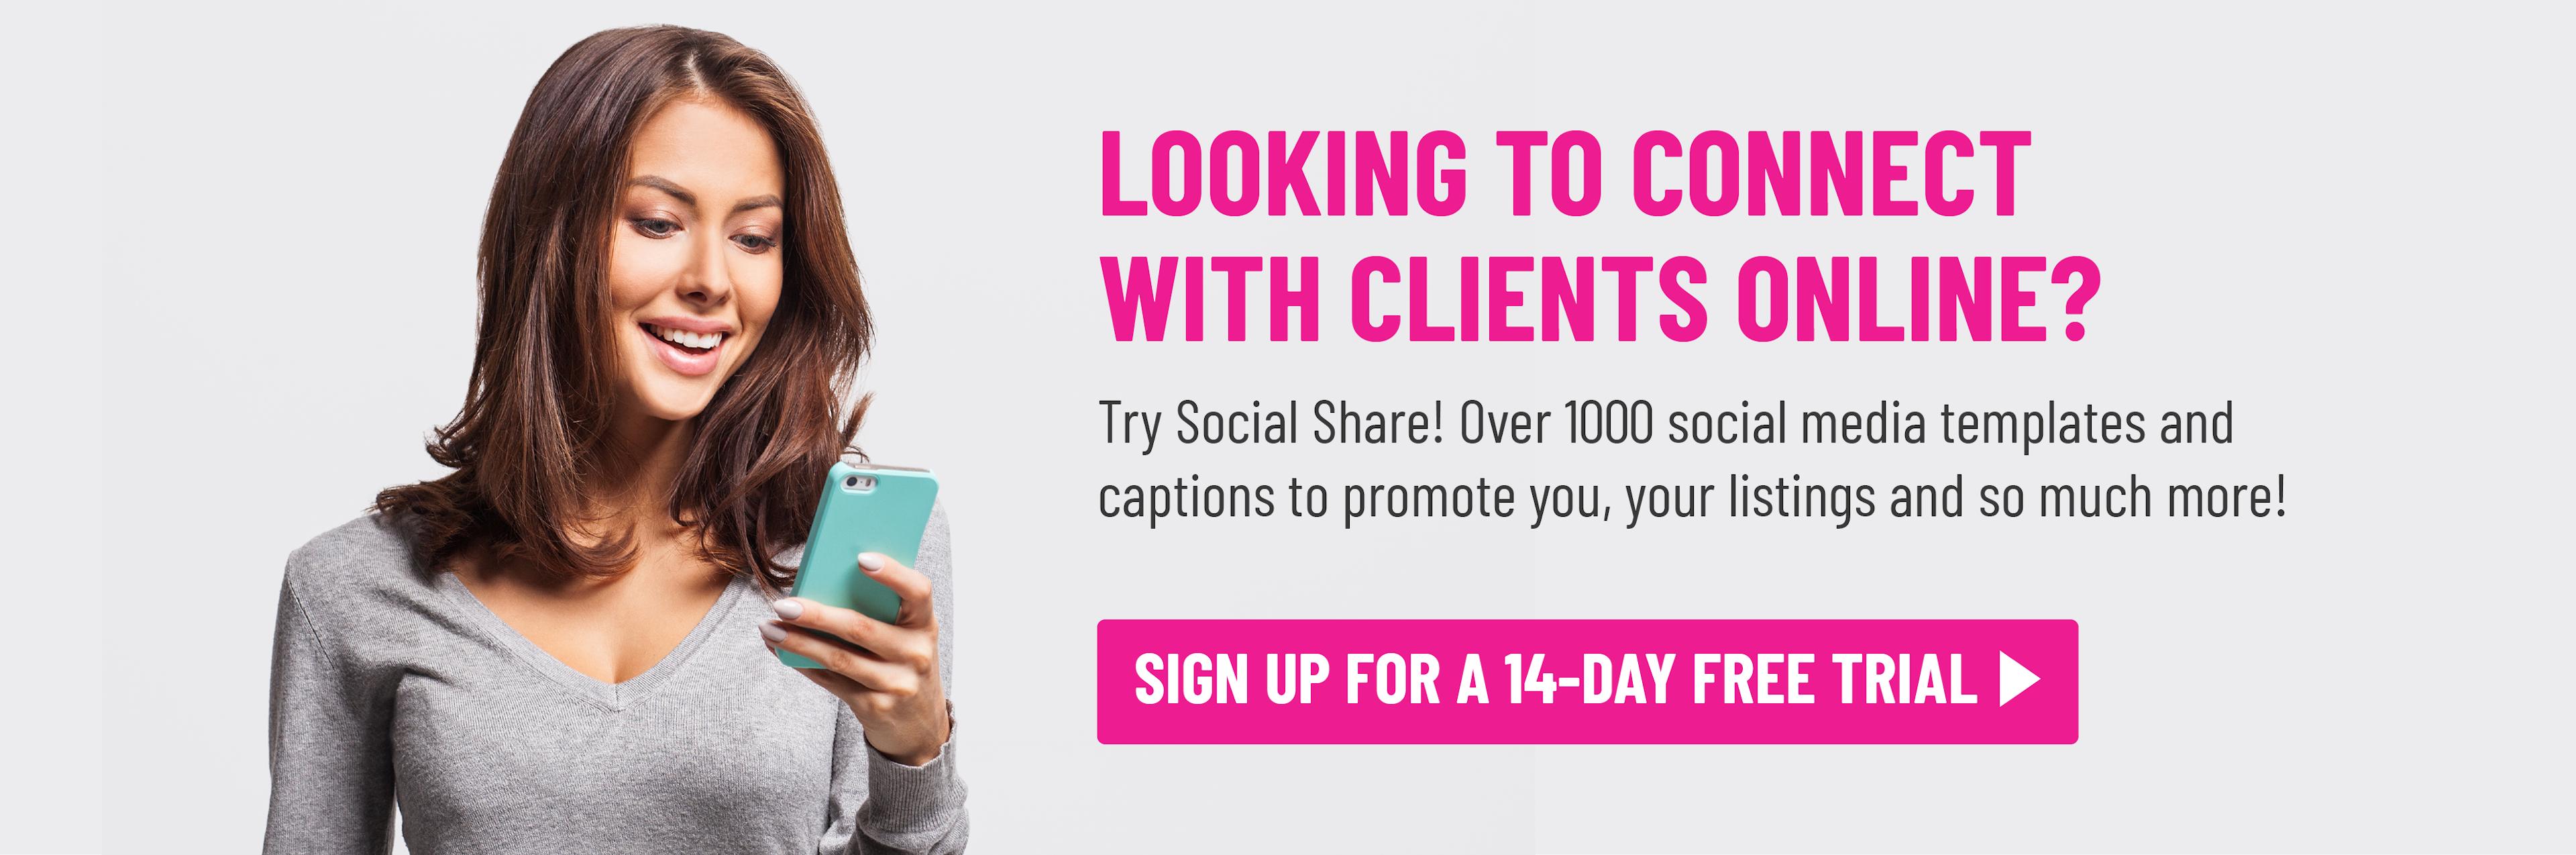 Social Share provides real estate professionals with thousands of social media templates and captions